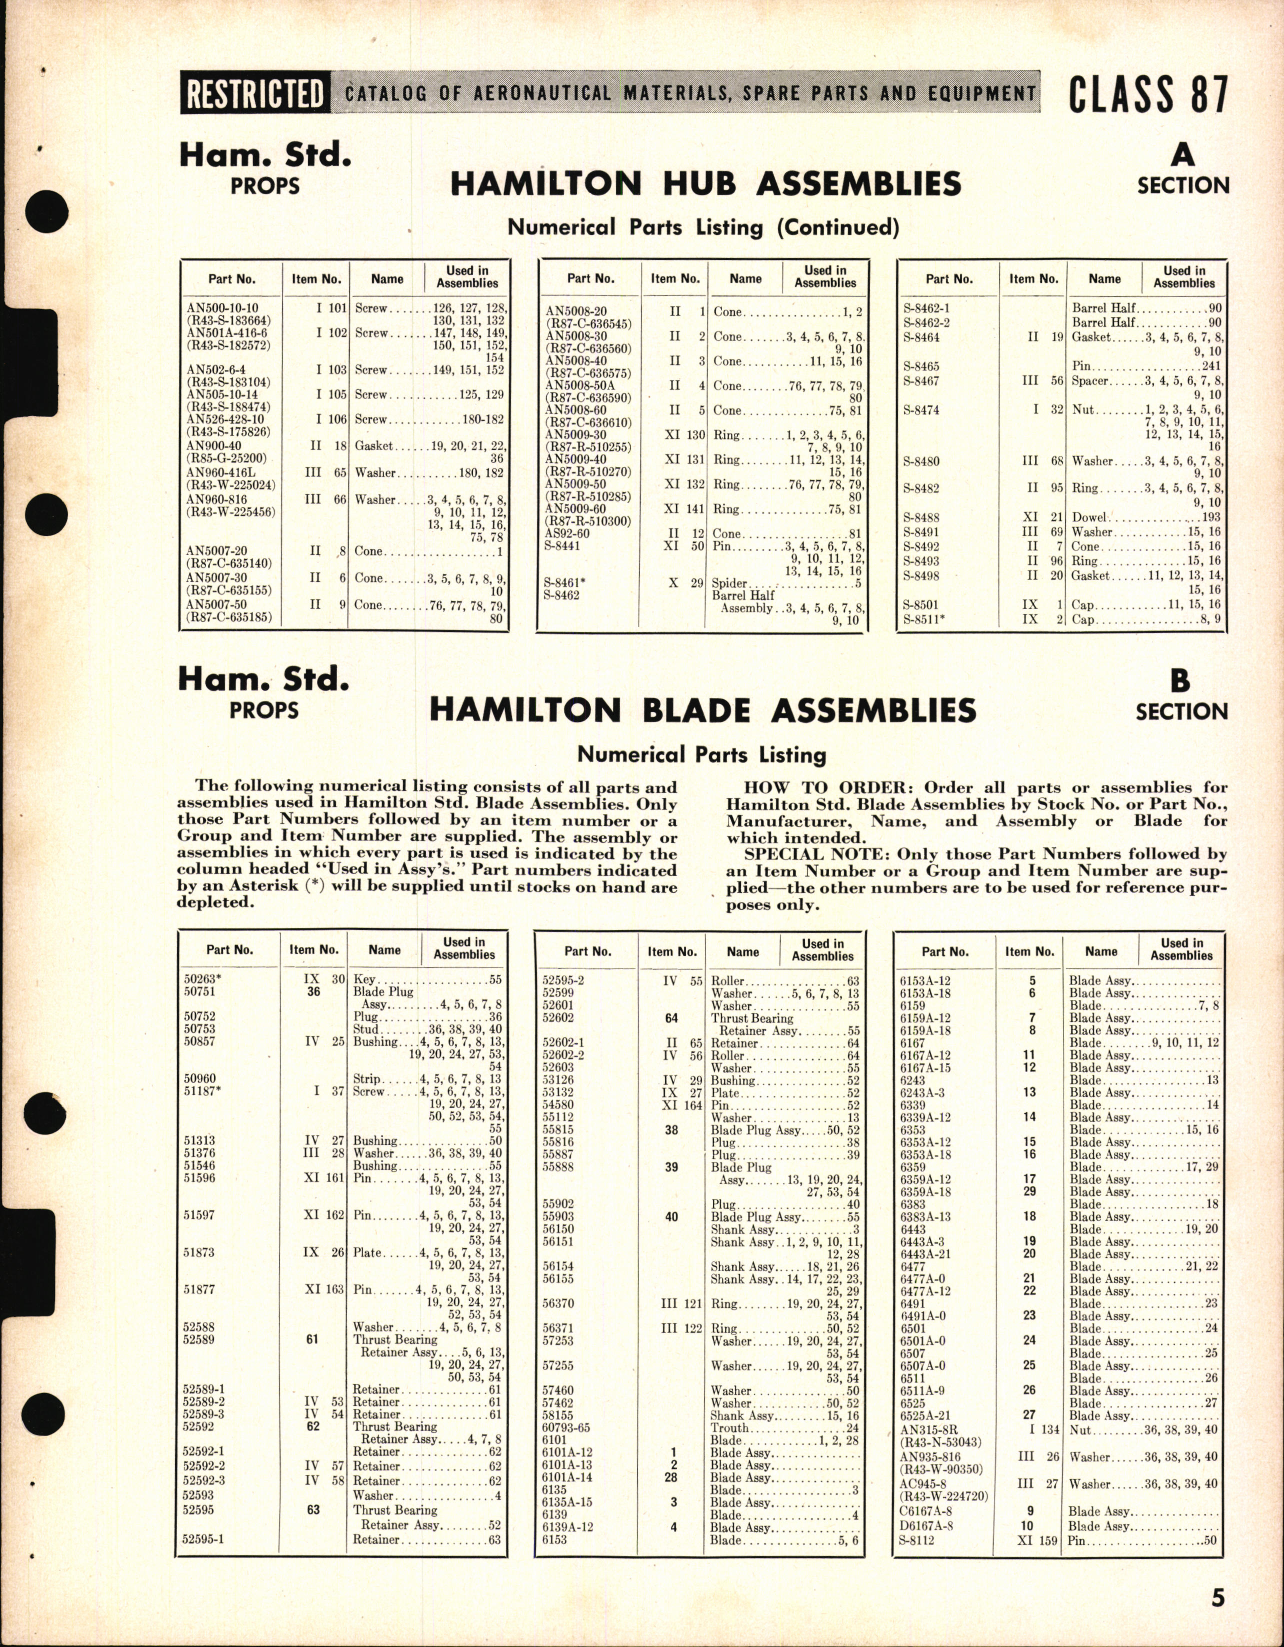 Sample page 5 from AirCorps Library document: Hamilton and Curtiss Propeller Hub and Blade Numerical Listings